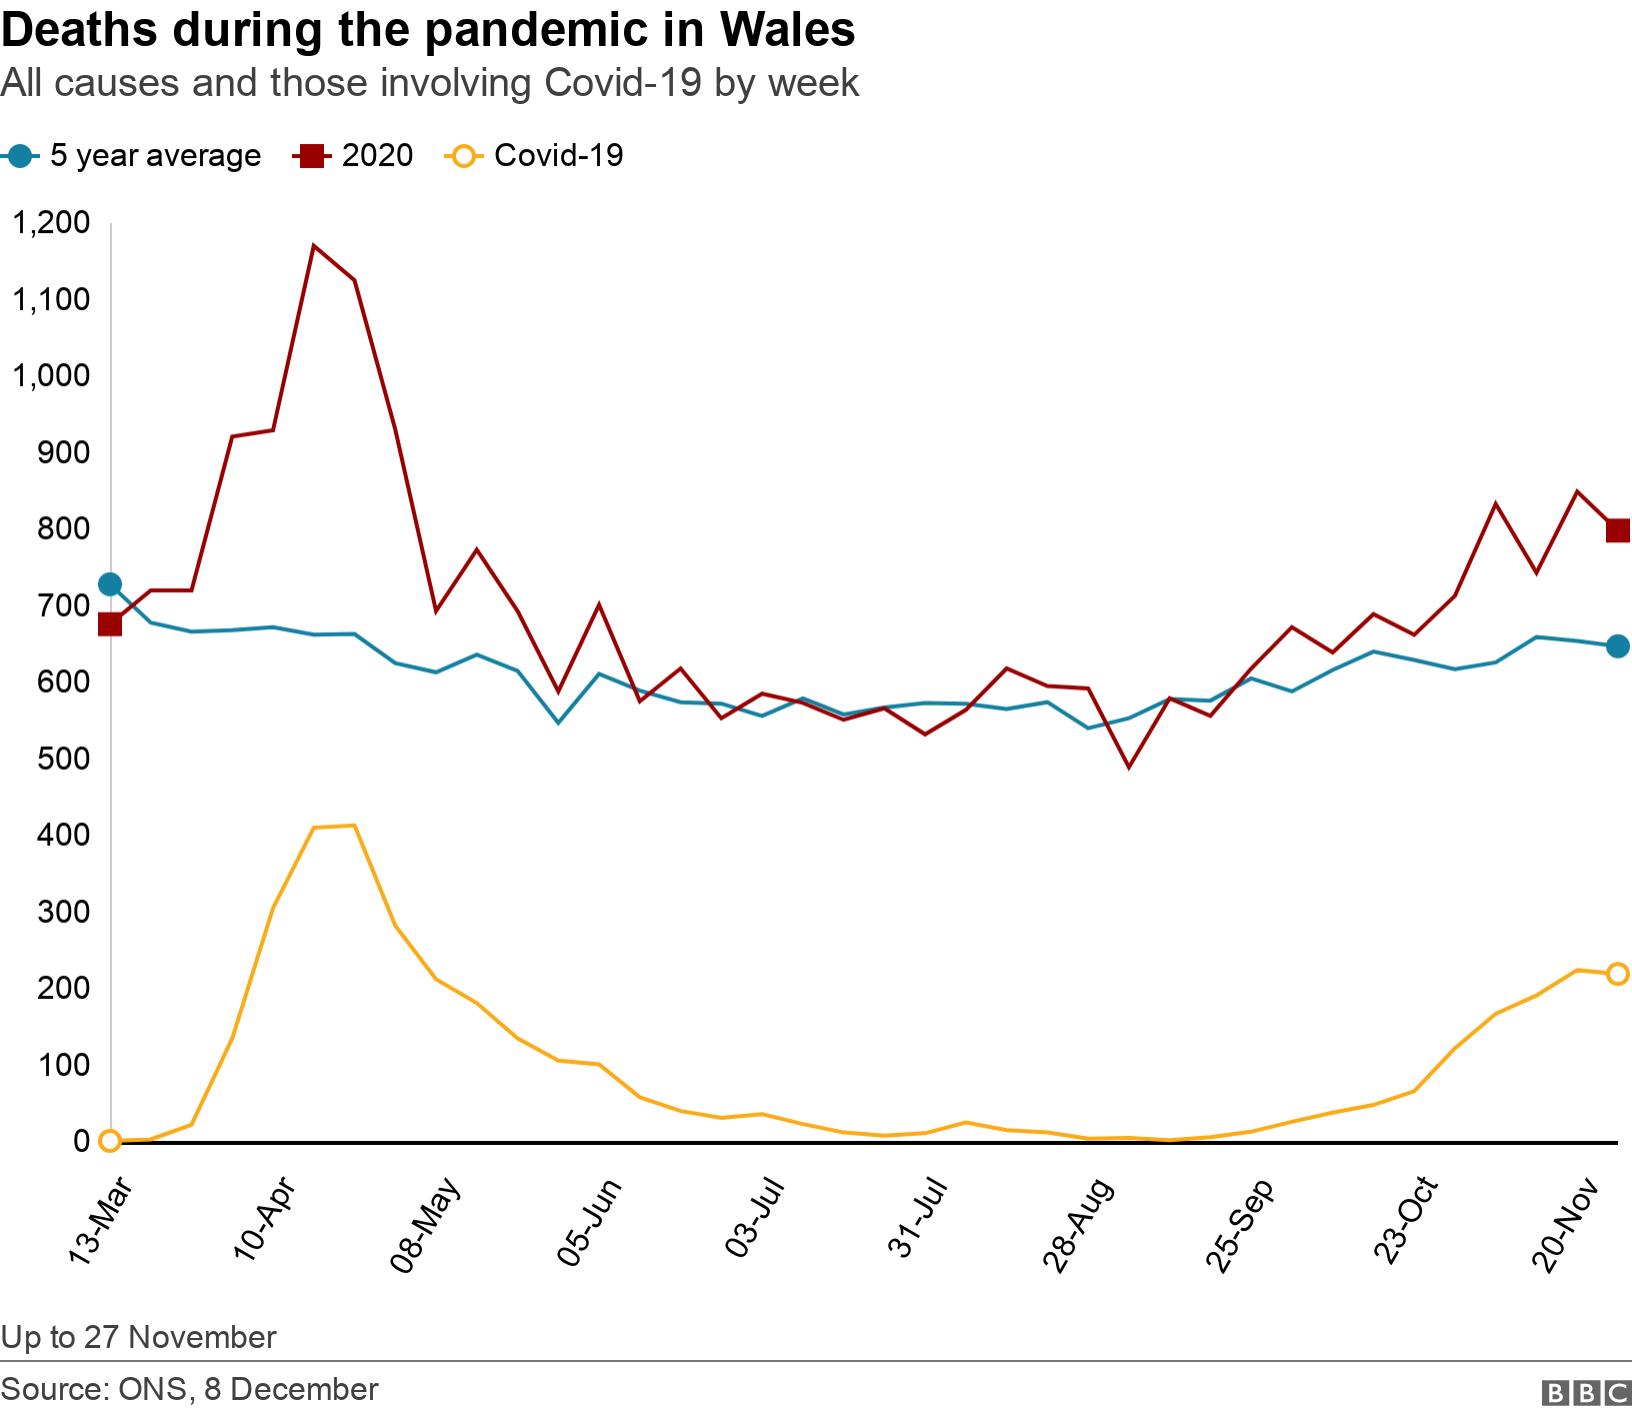 Deaths during the pandemic in Wales. All causes and those involving Covid-19 by week. Up to 27 November.